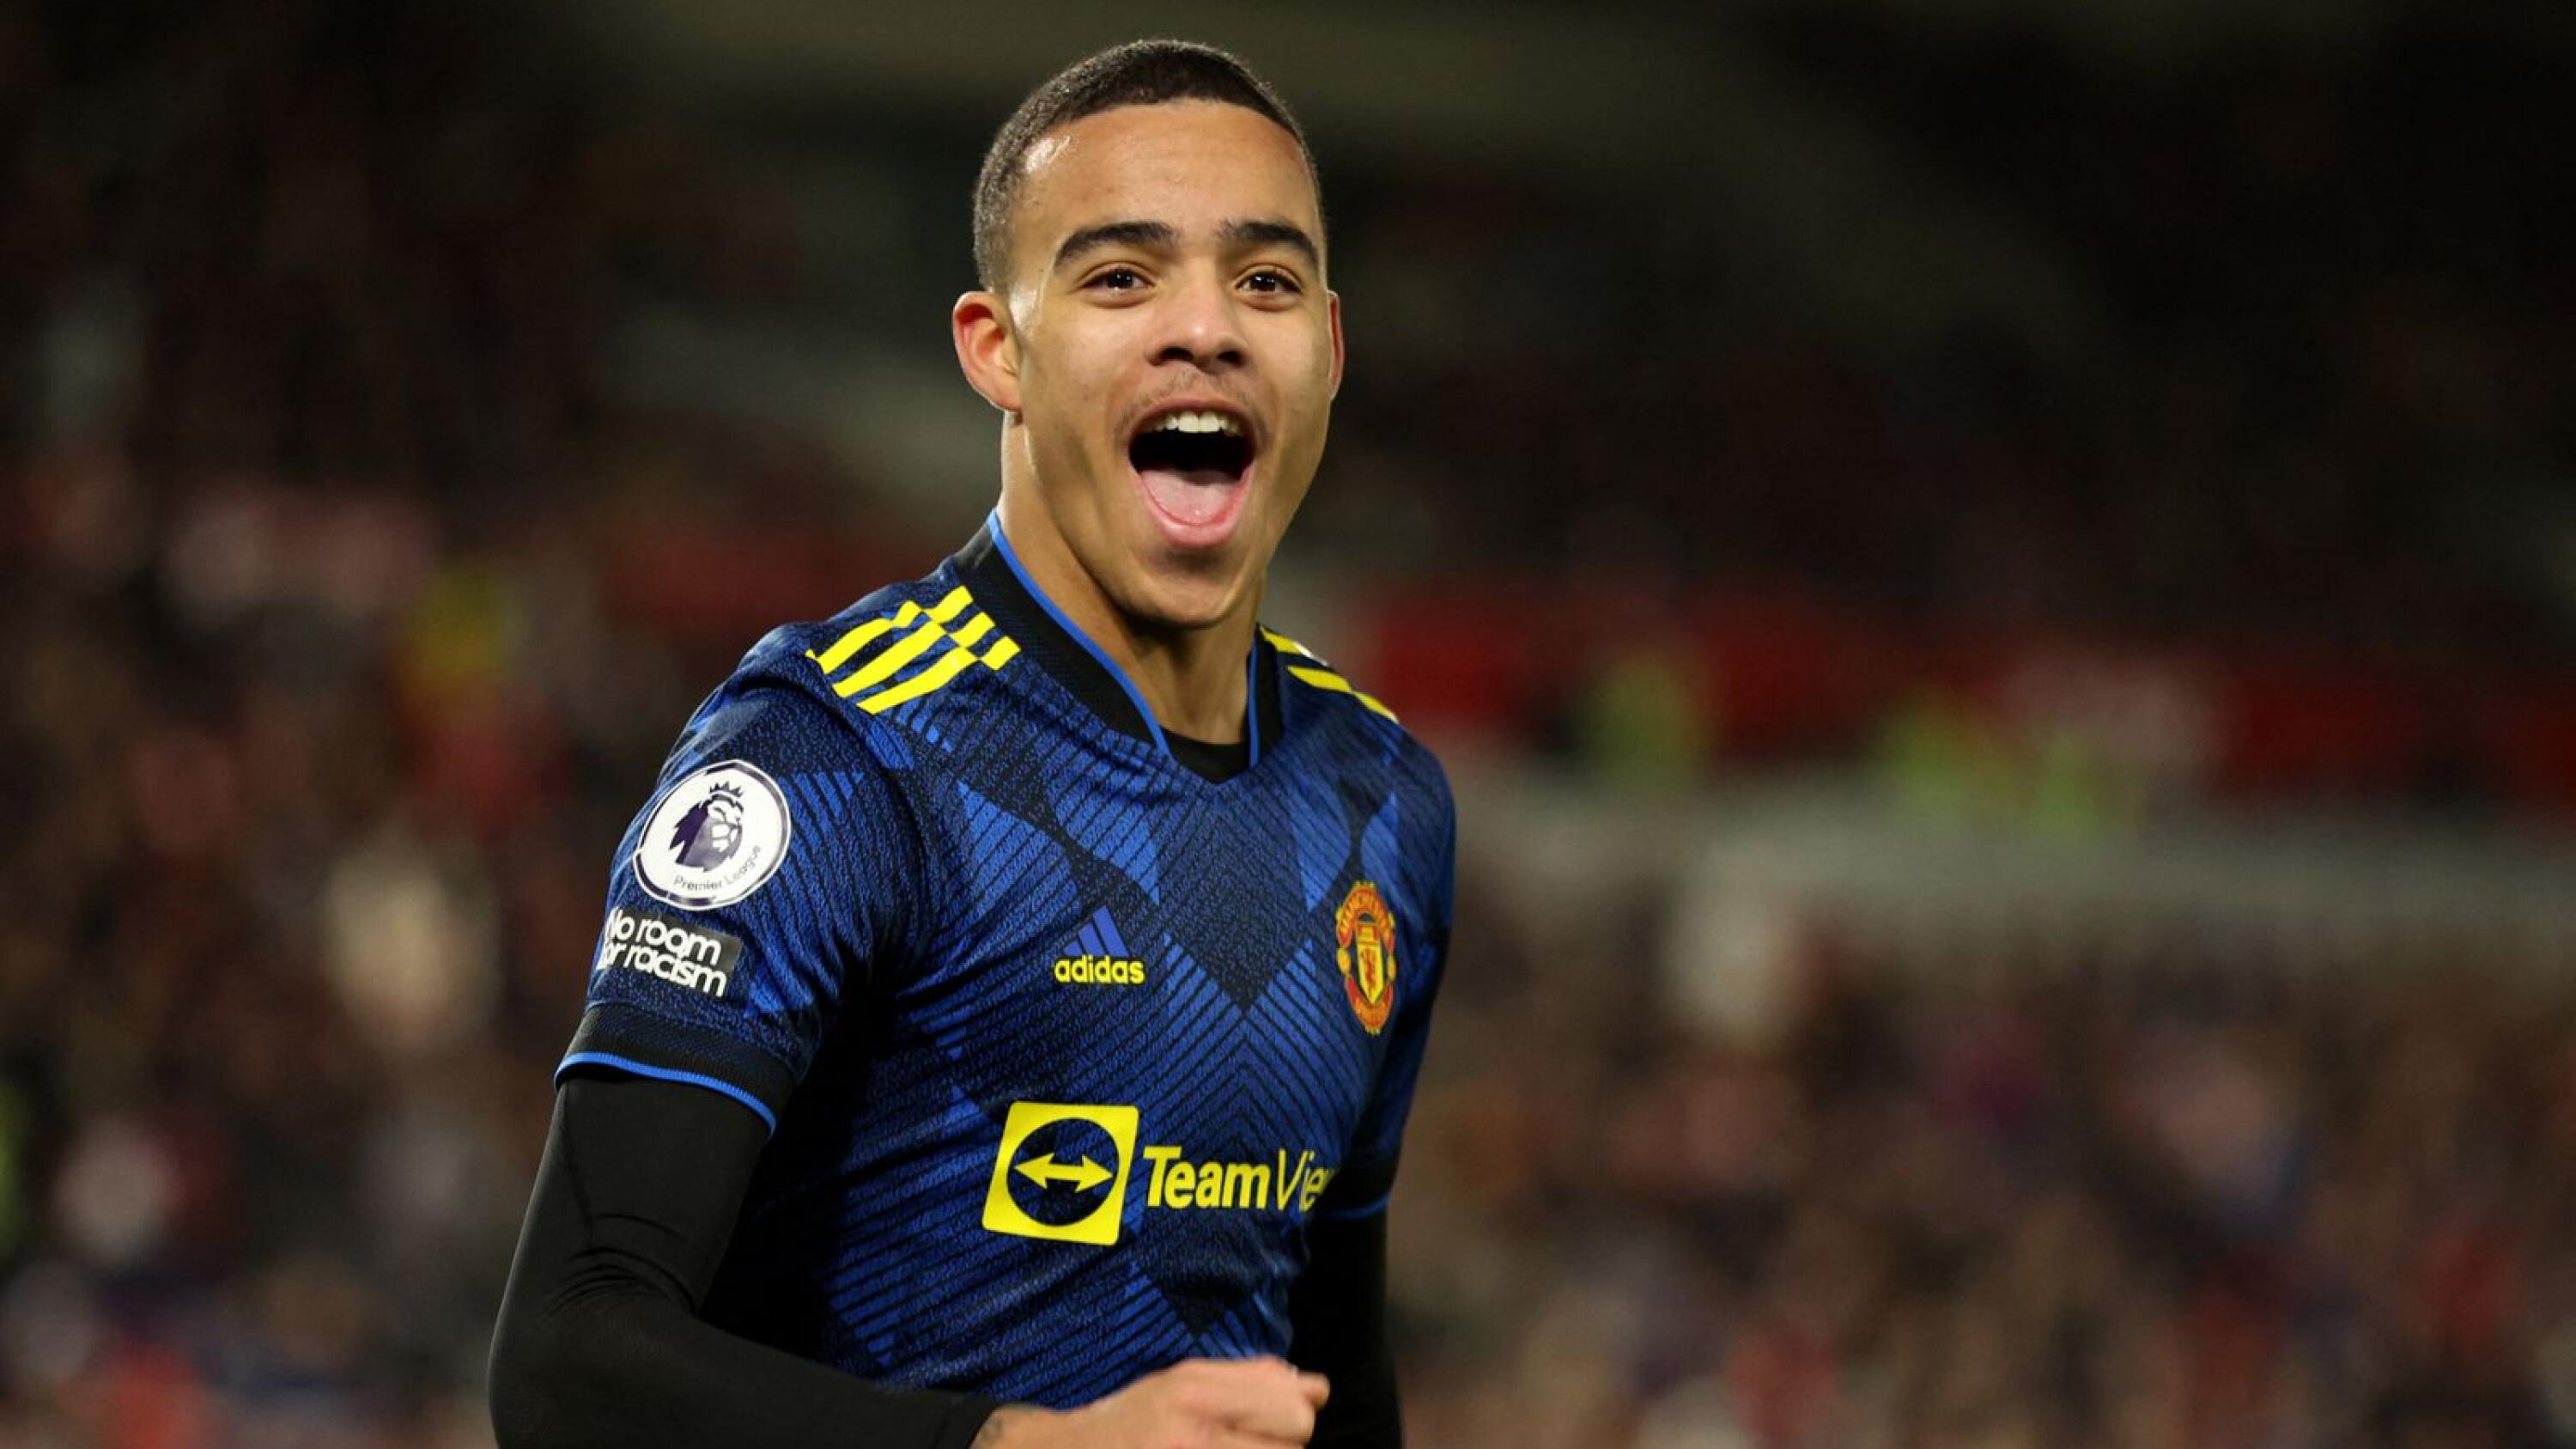 Manchester United's Mason Greenwood celebrates after scoring their second goal in their Premier League game against Brentford. Sports apparel company Nike say they have suspended their relationship with Manchester United’s Mason Greenwood following his arrest on suspicion of rape and assault